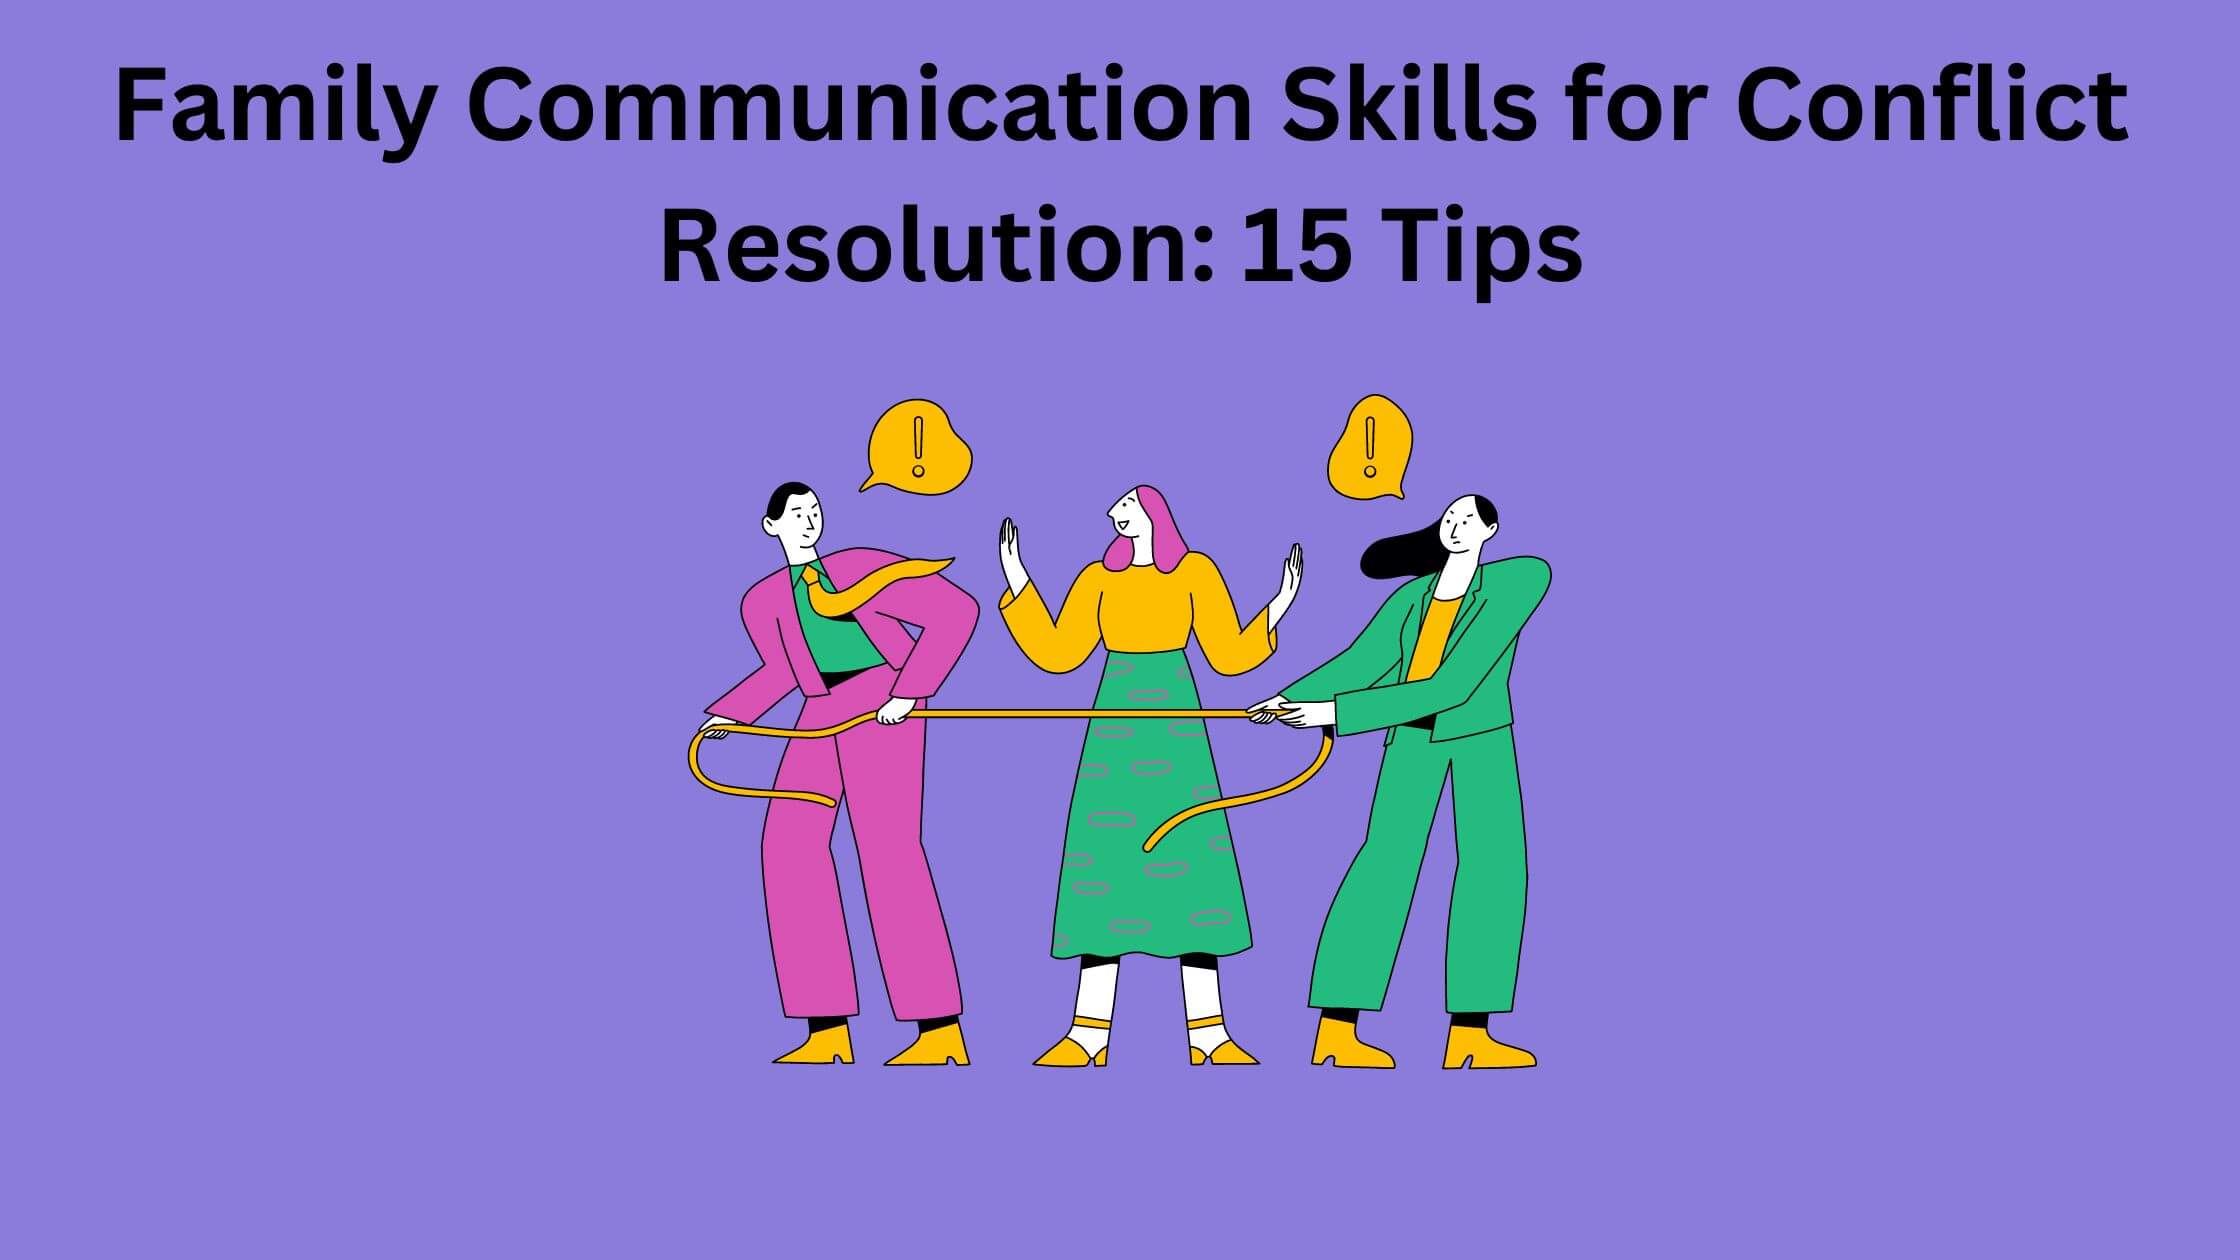 Family Communication Skills for Conflict Resolution: 15 Tips